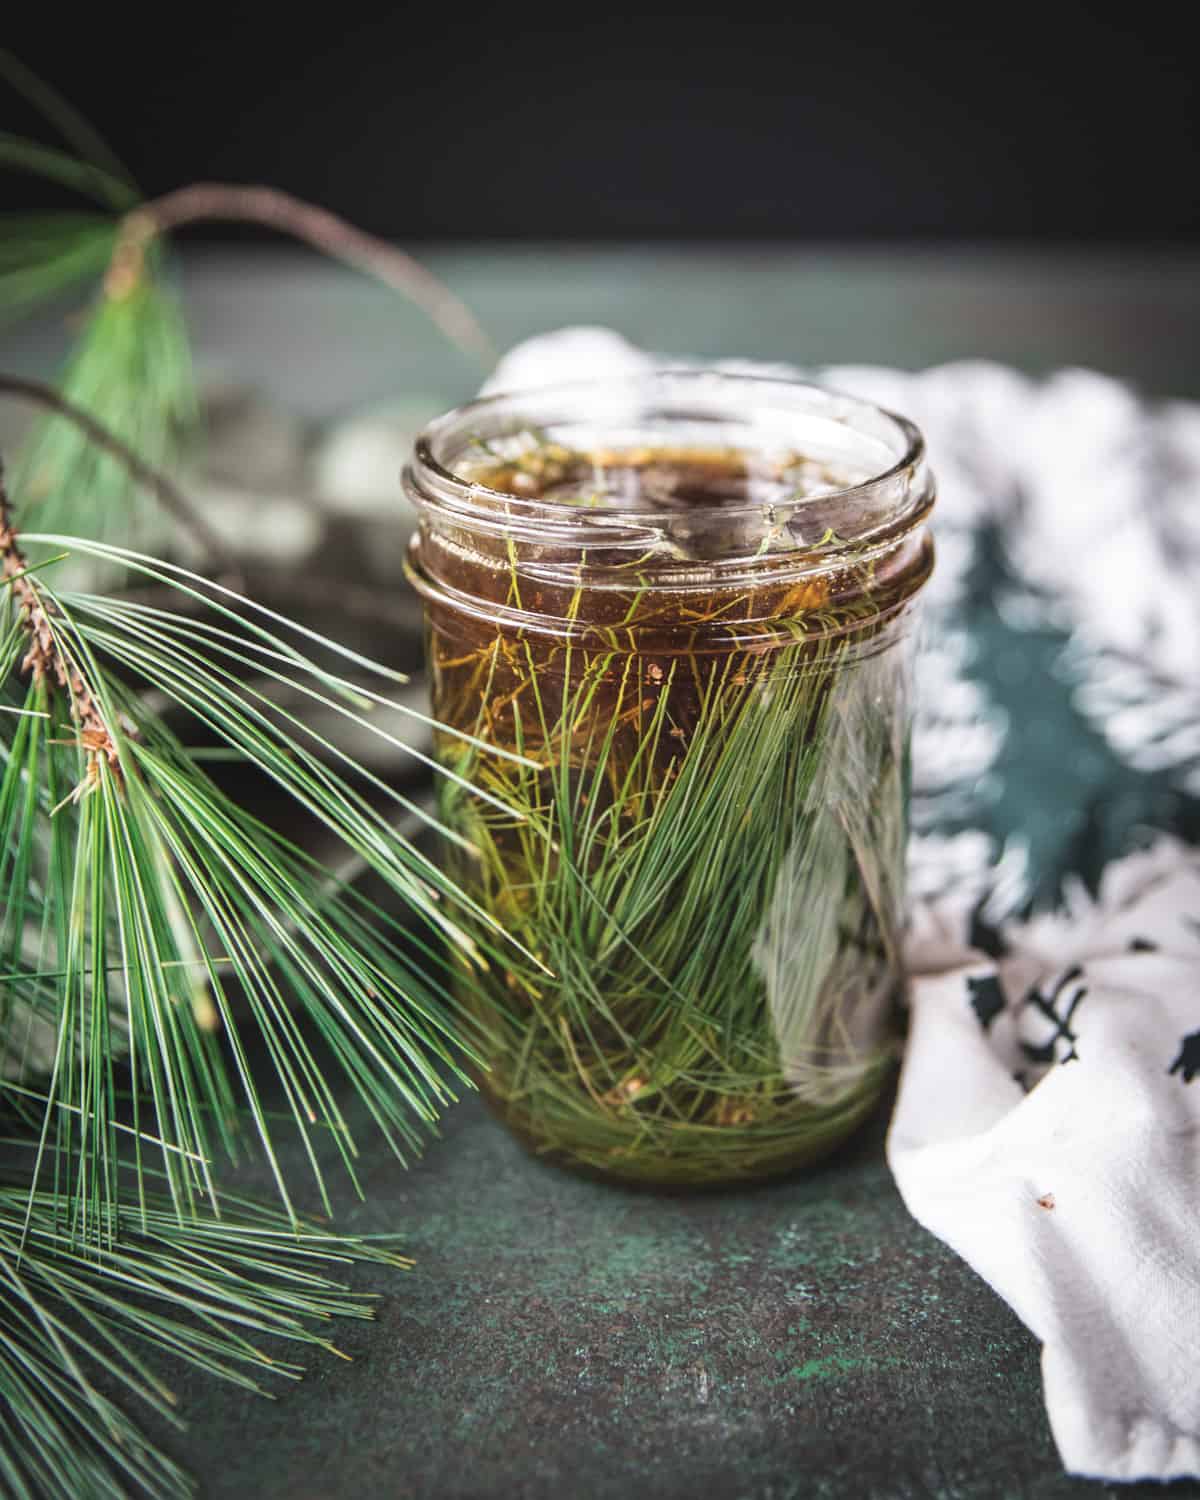 An open jar with pine needles covered in honey, surrounded by fresh pine fronds.